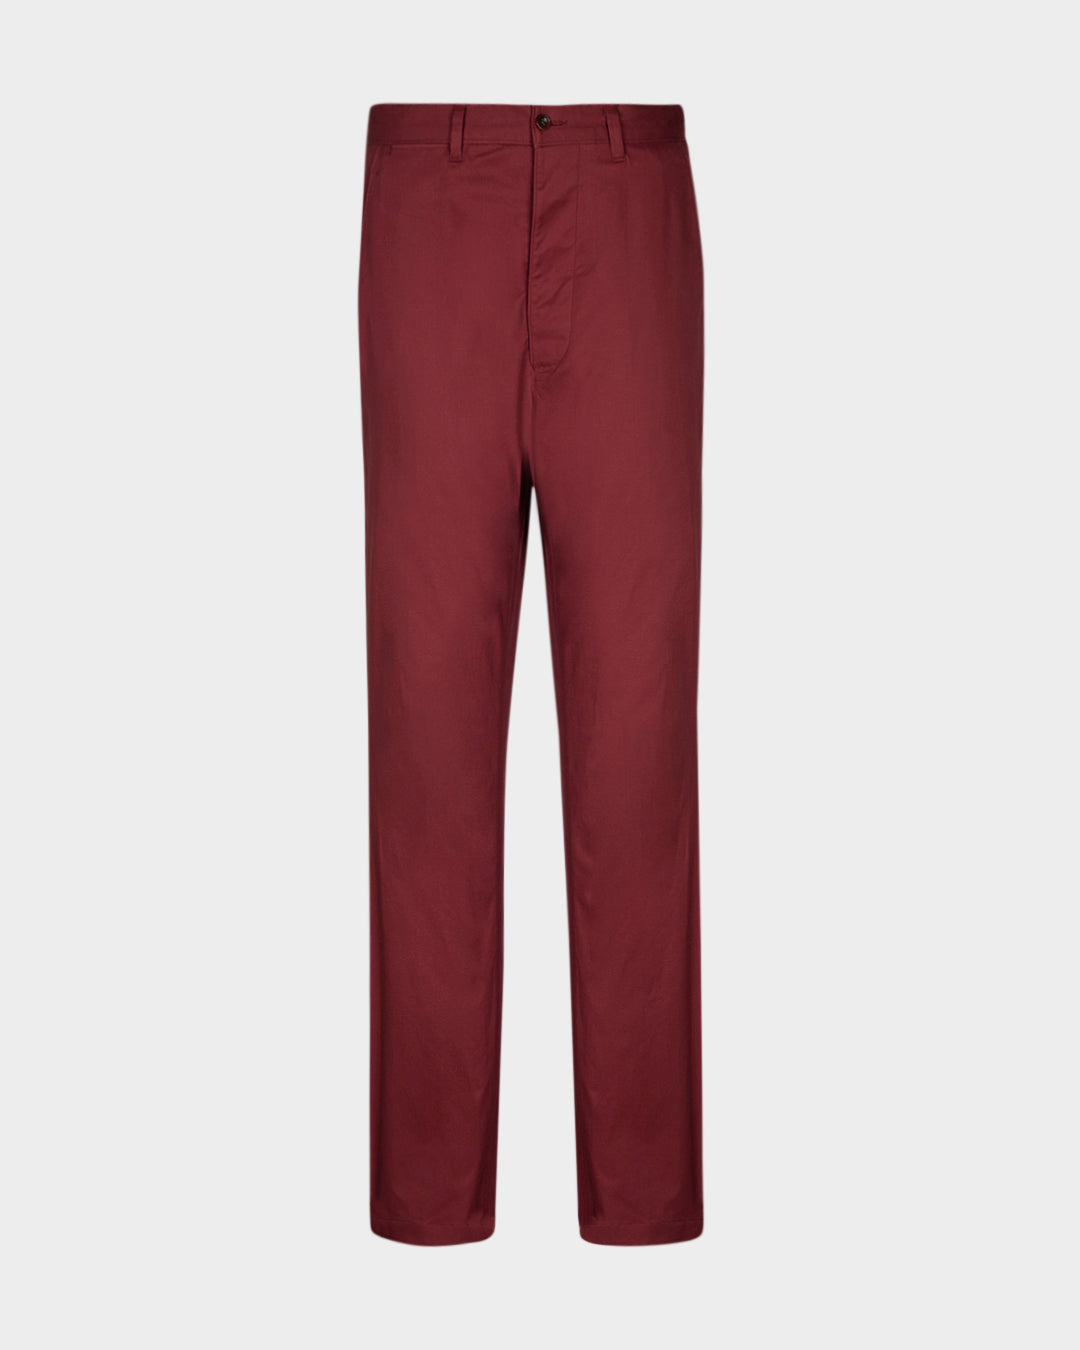 Front view of custom Genoa Chino pants for men by Luxire in plum